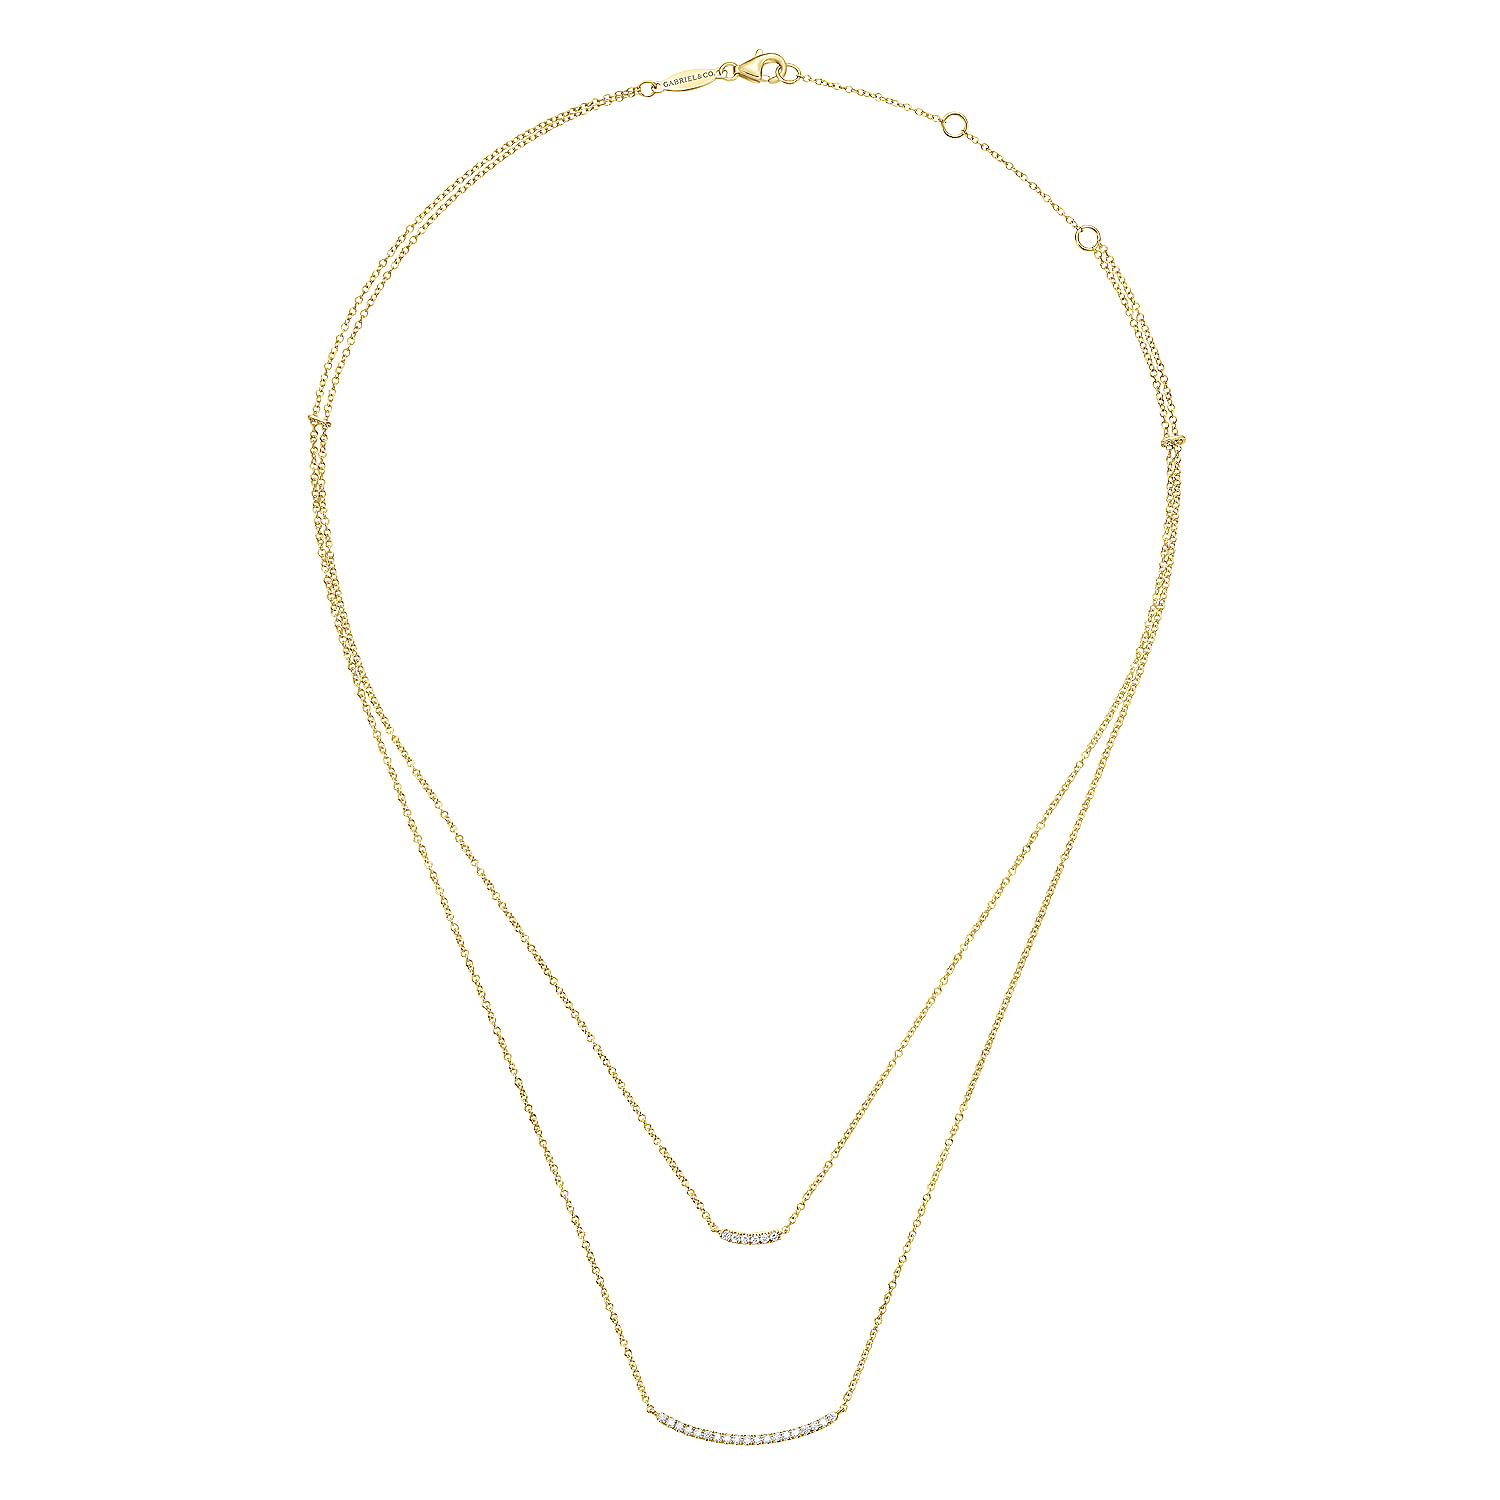 Two Strand 14K Yellow Gold Curved Diamond Bar Necklace